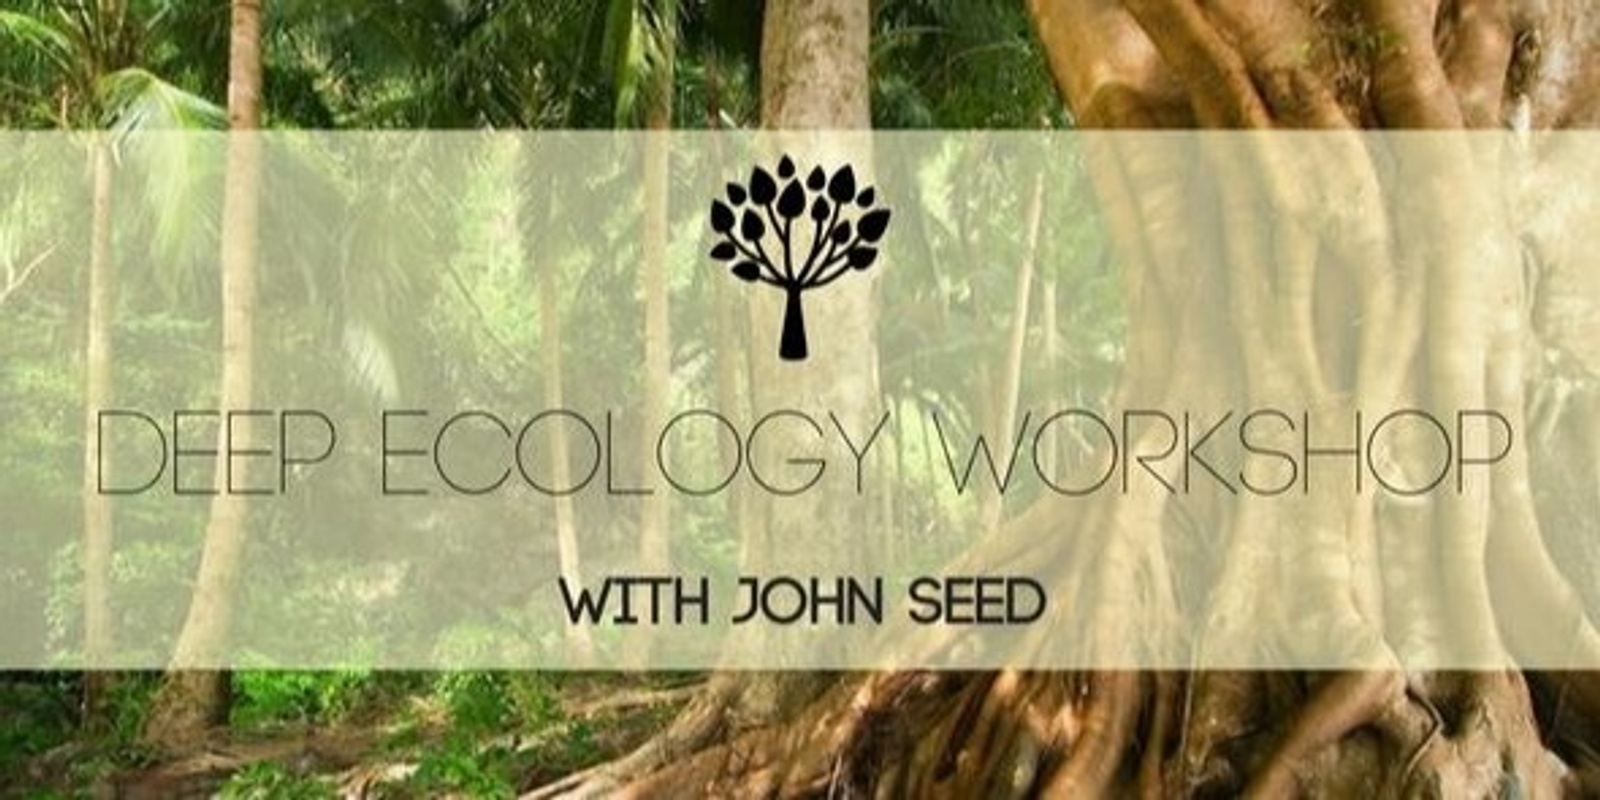 DEEP ECOLOGY with John Seed at Kyogle